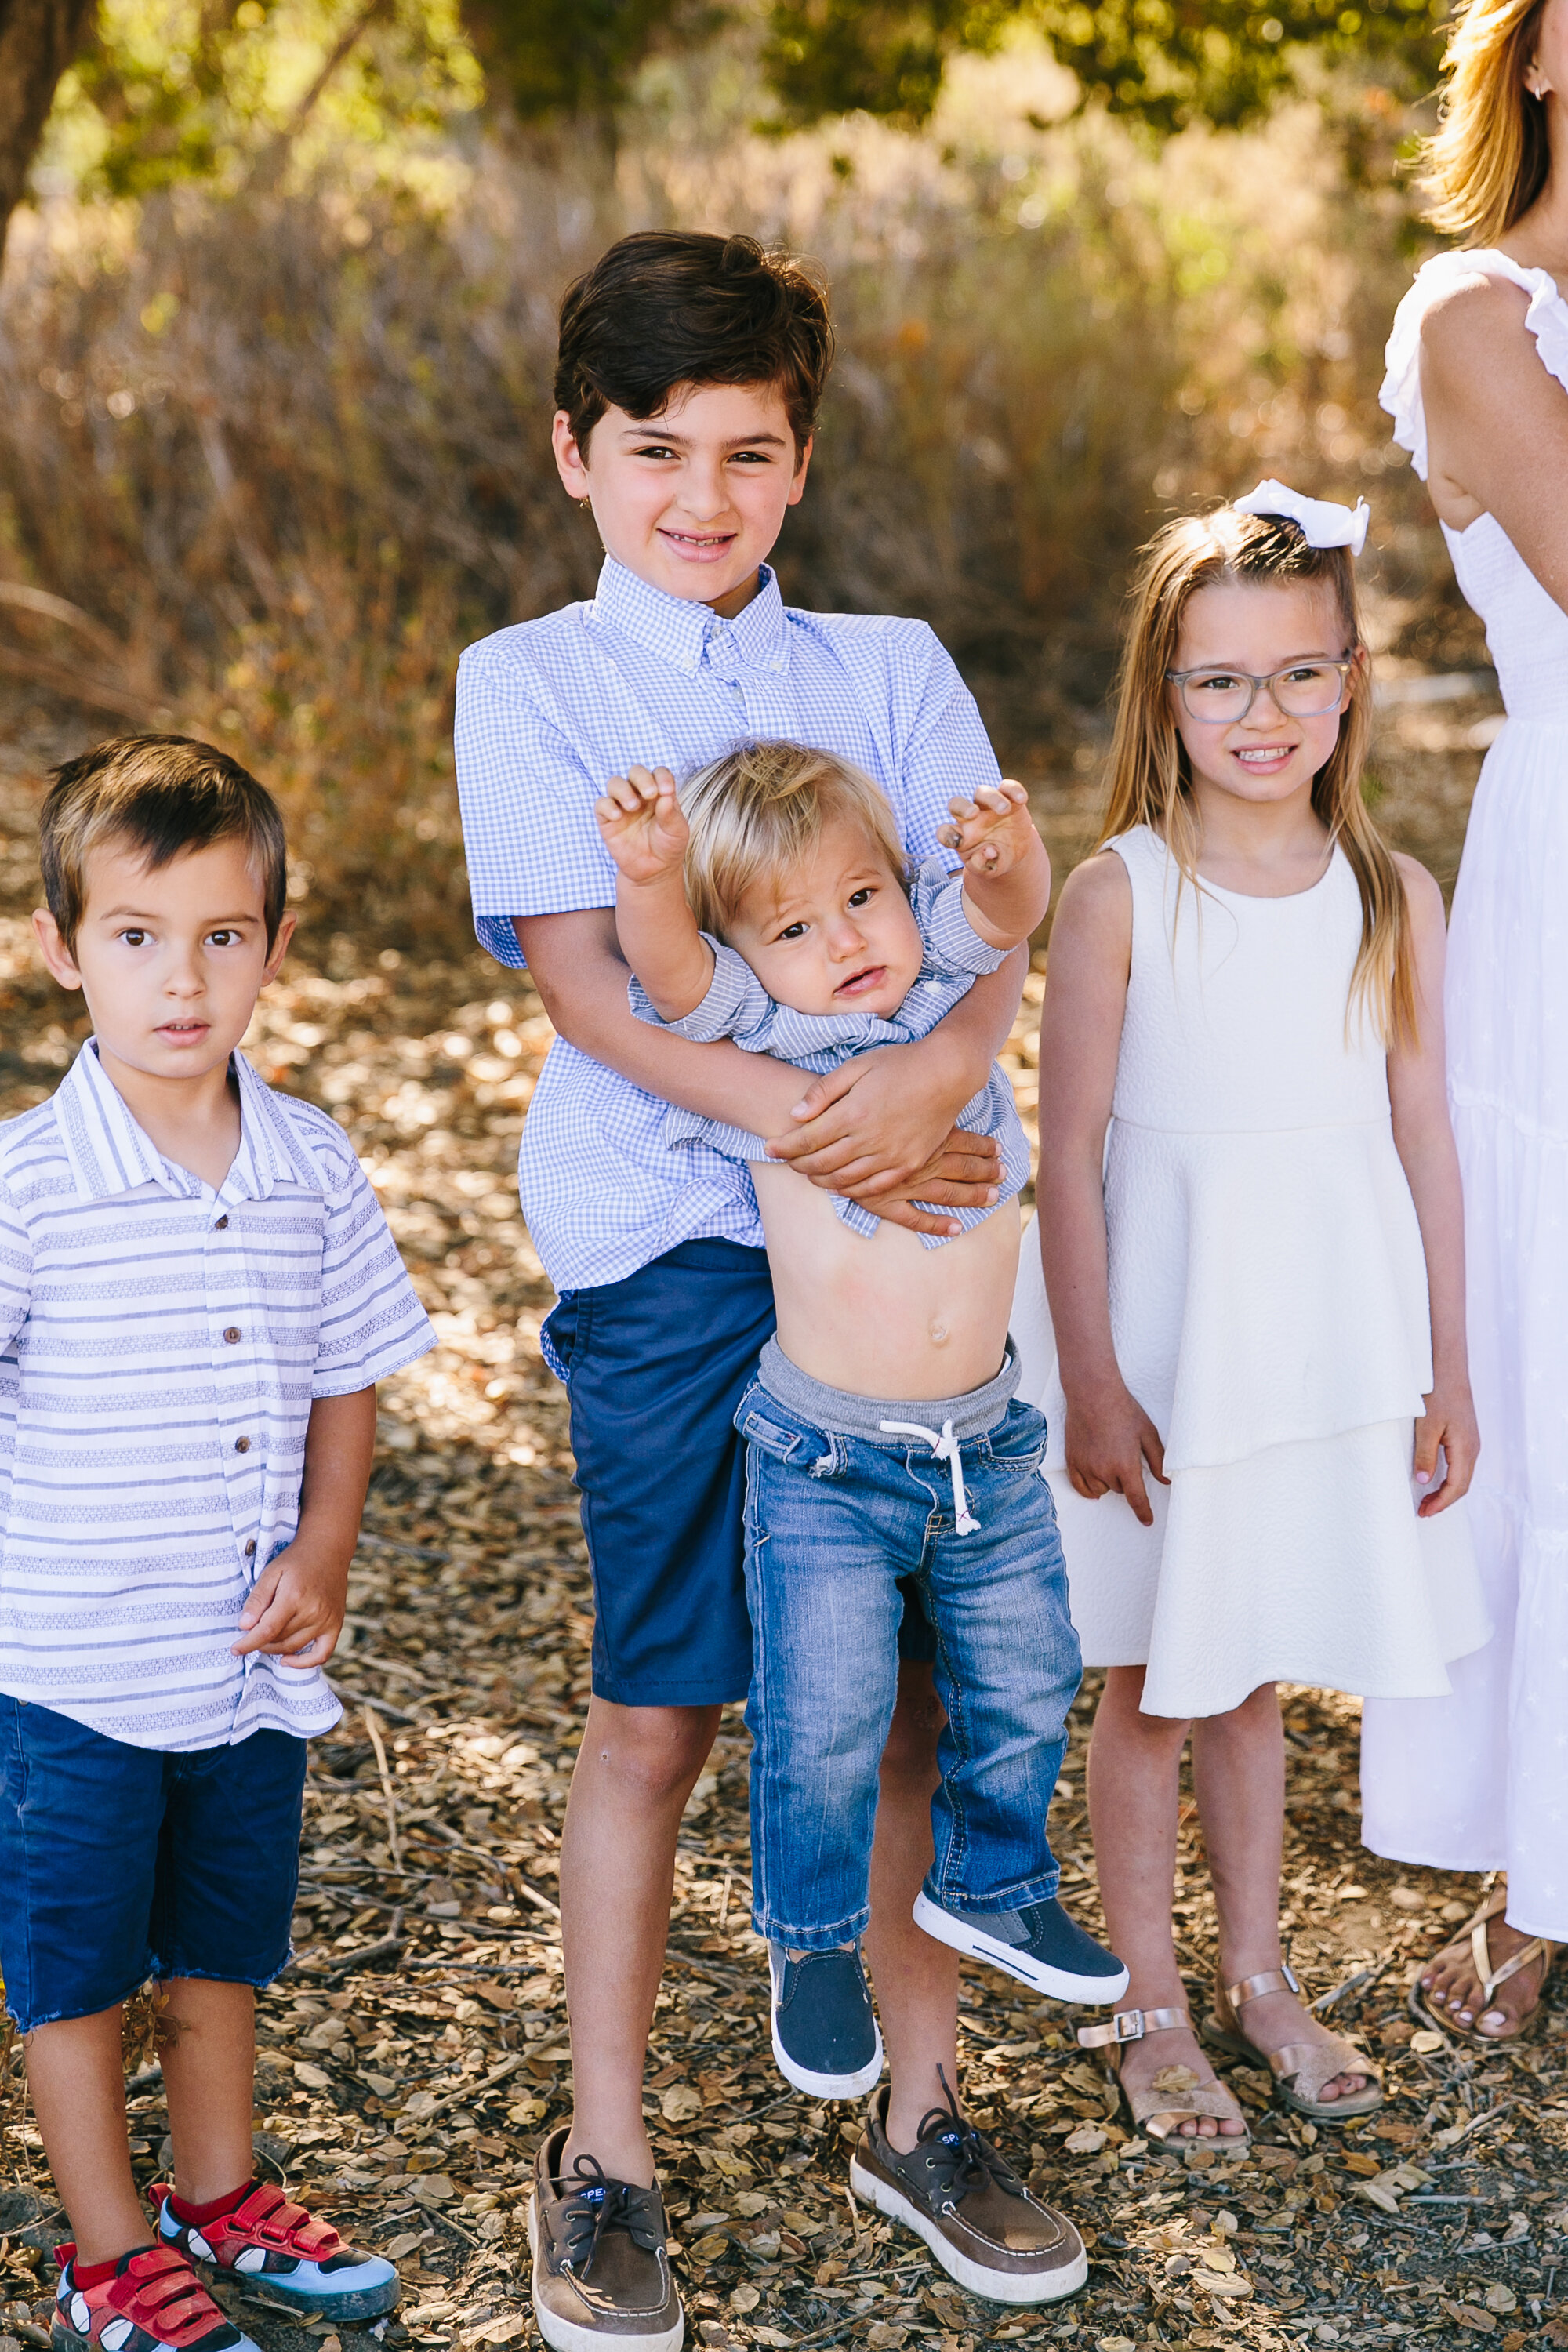 Los_Angeles_Family_Photography_Orange_County_Children_Babies_Field_Farm_Outdoors_Morning_Session_California_Girls_Boys_Kids_Photography-0585.jpg